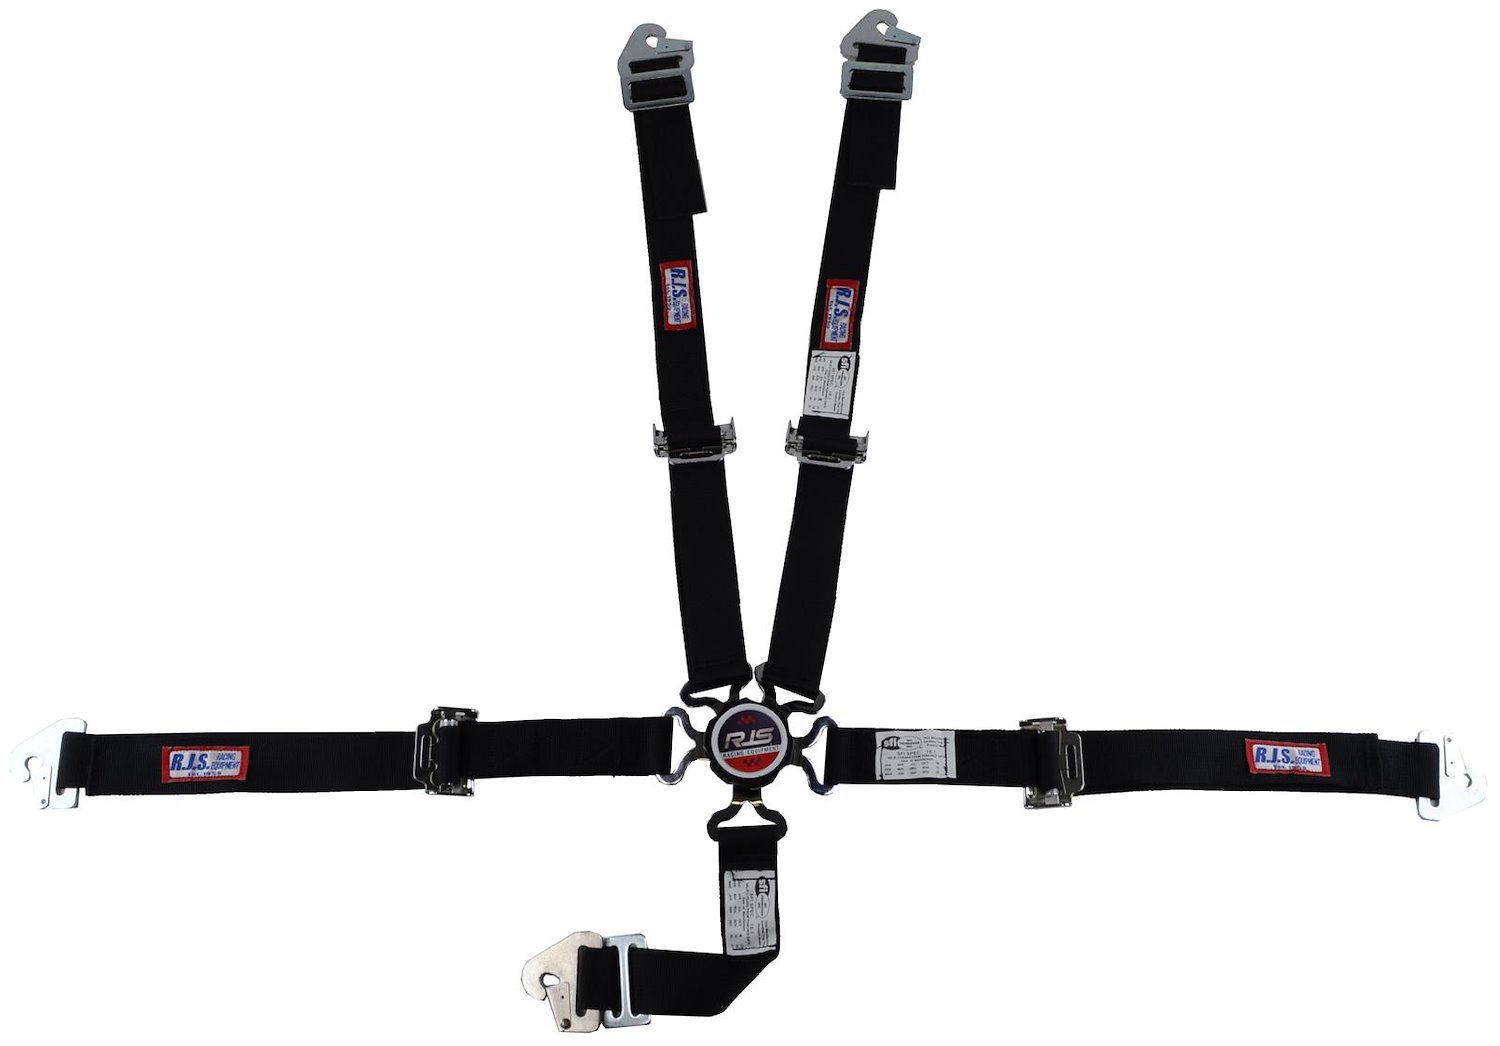 SFI 16.1 CAM-LOCK HARNESS 2 PULL UP Lap Belt 2 Shoulder Harness Individual FLOOR Mount 2 SINGLE Sub ALL WRAP/BOLT ENDS YELLOW